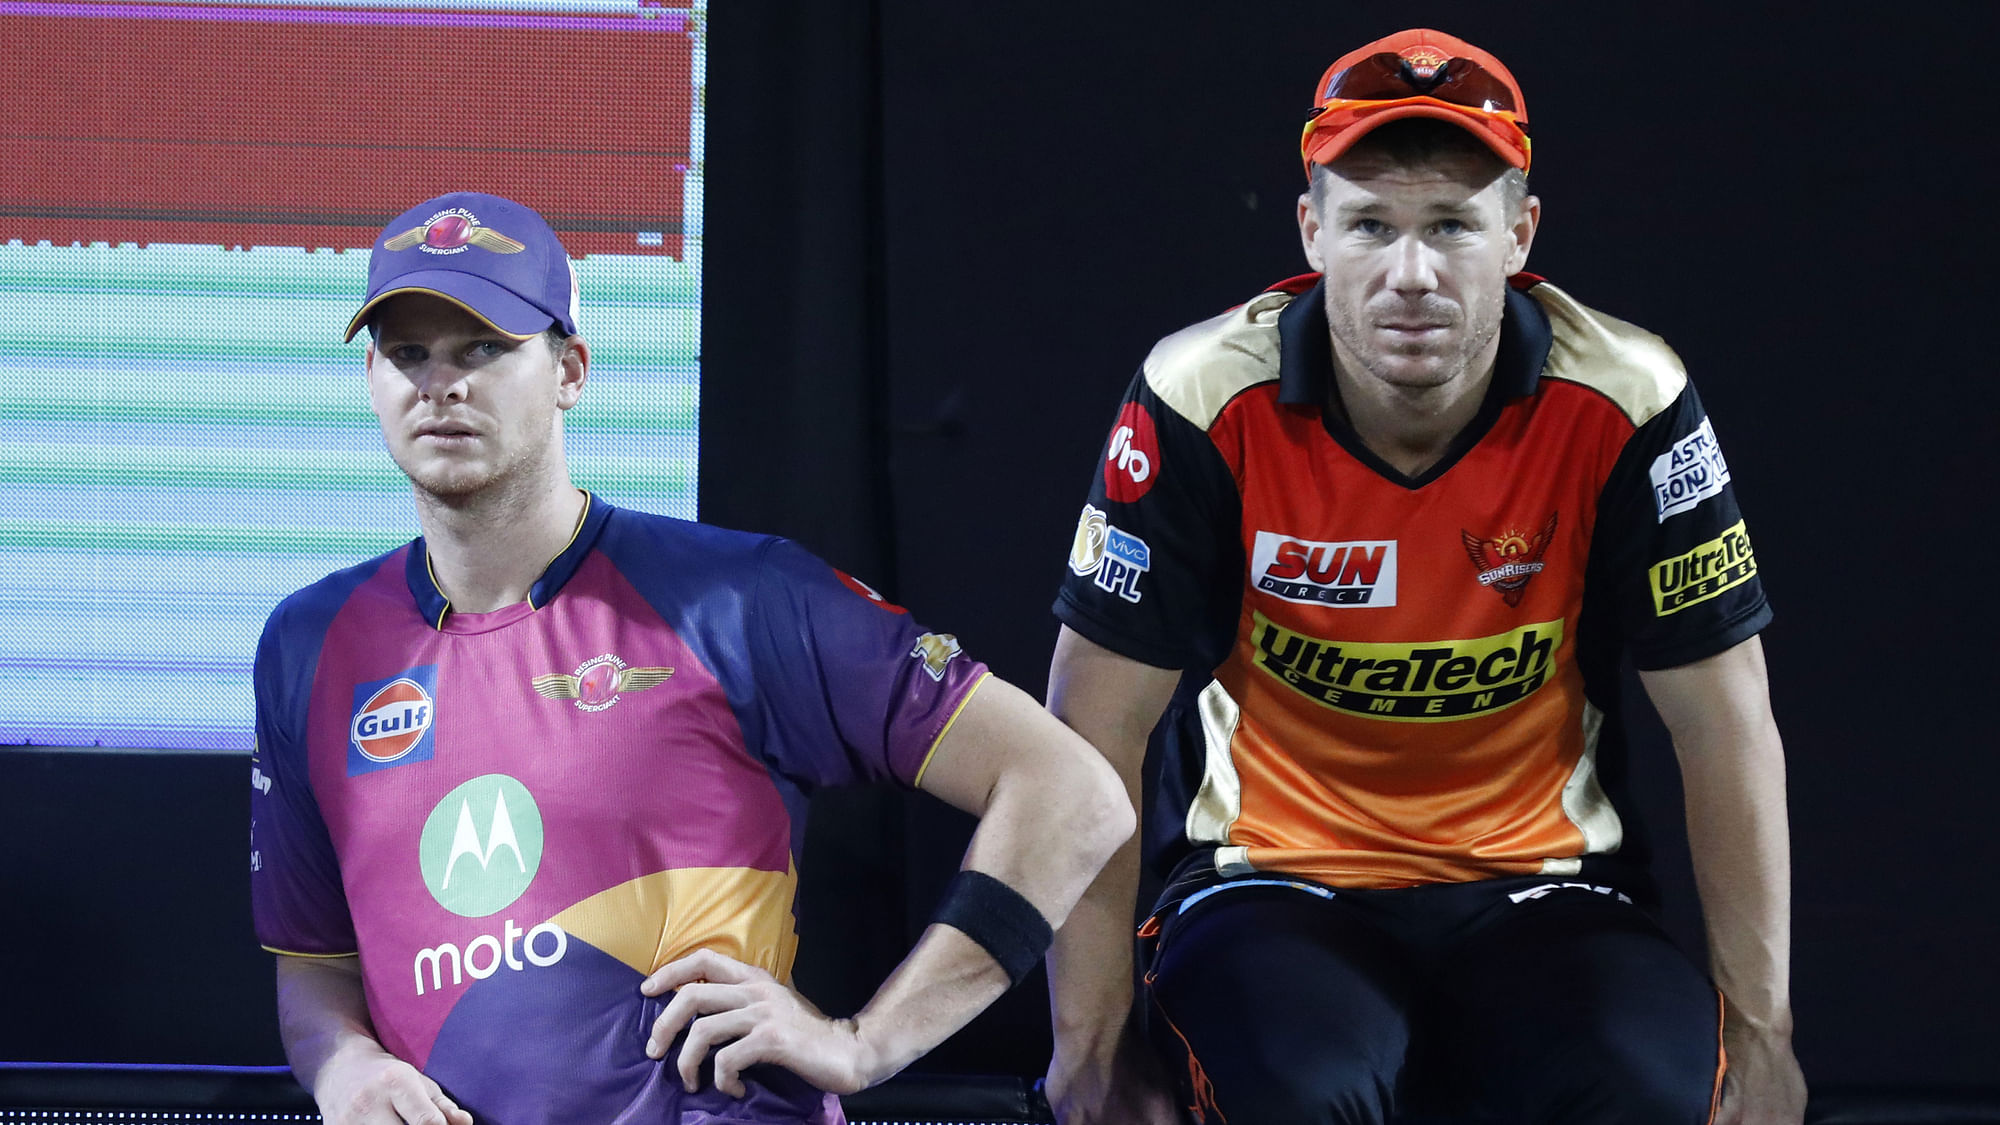 File photo of Steve Smith and David Warner who will be playing the Indian Premier League this season.